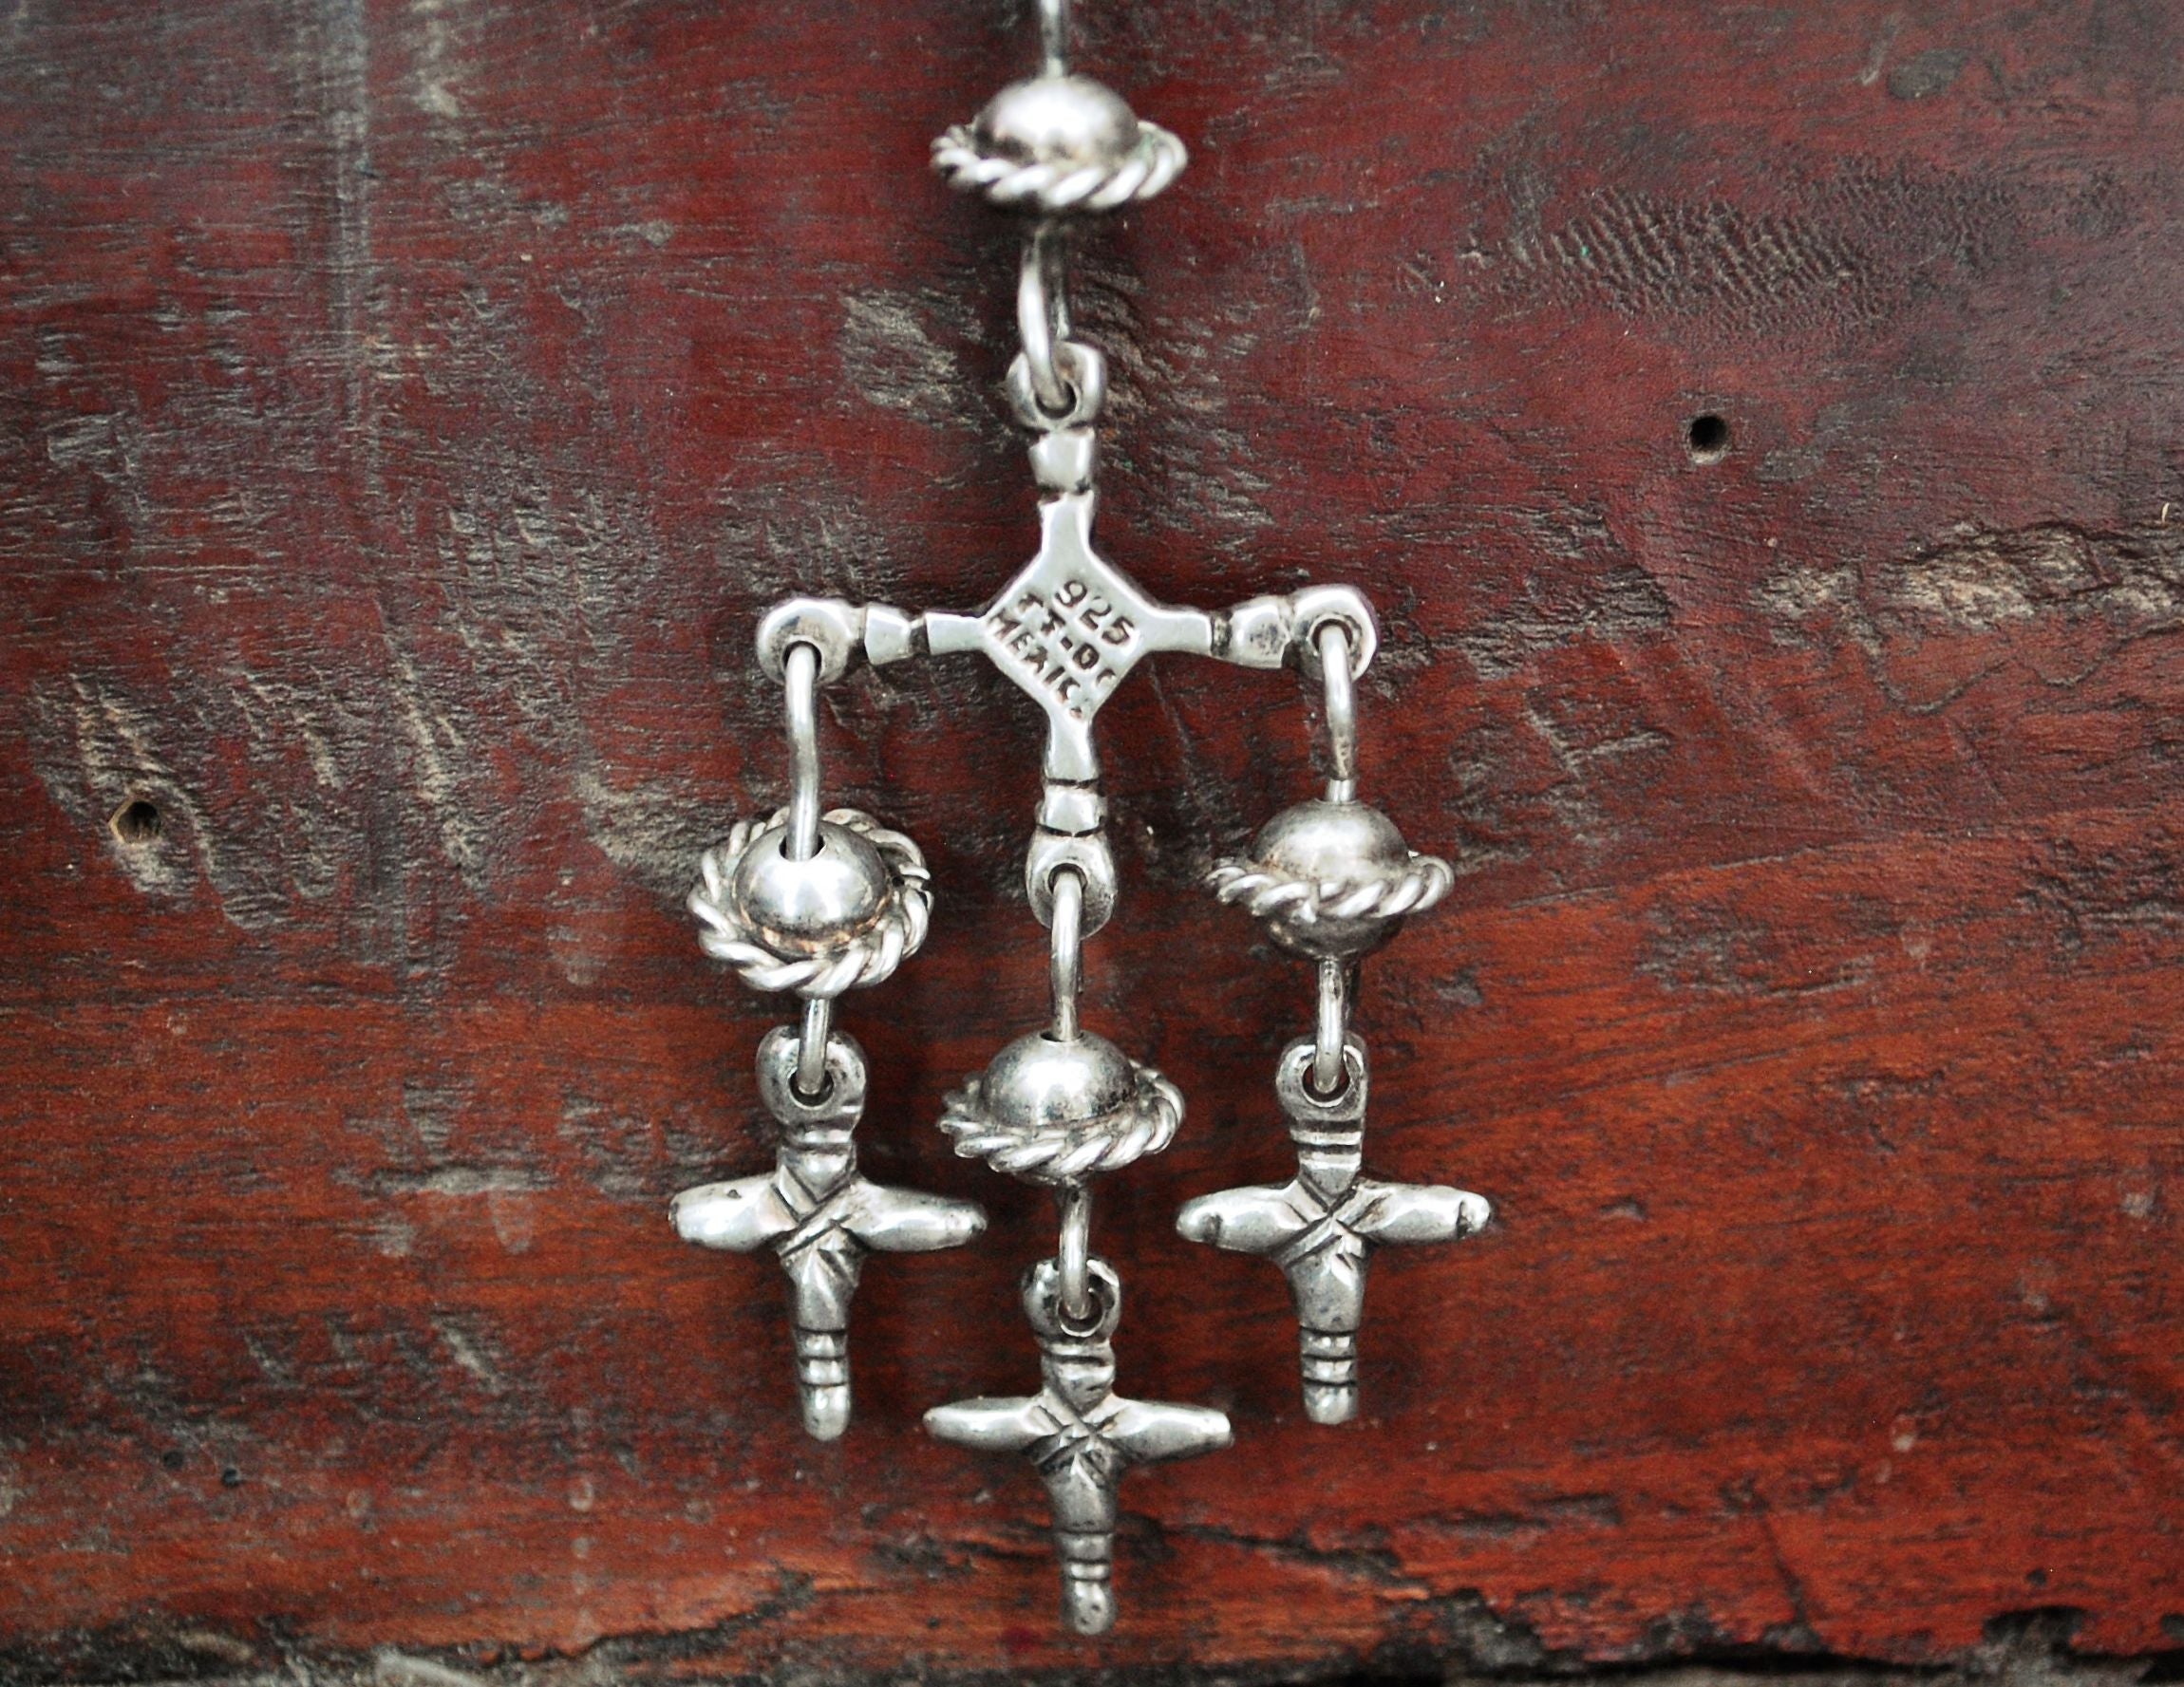 Yalalag Silver Cross Pendant - Mexican Jewelry